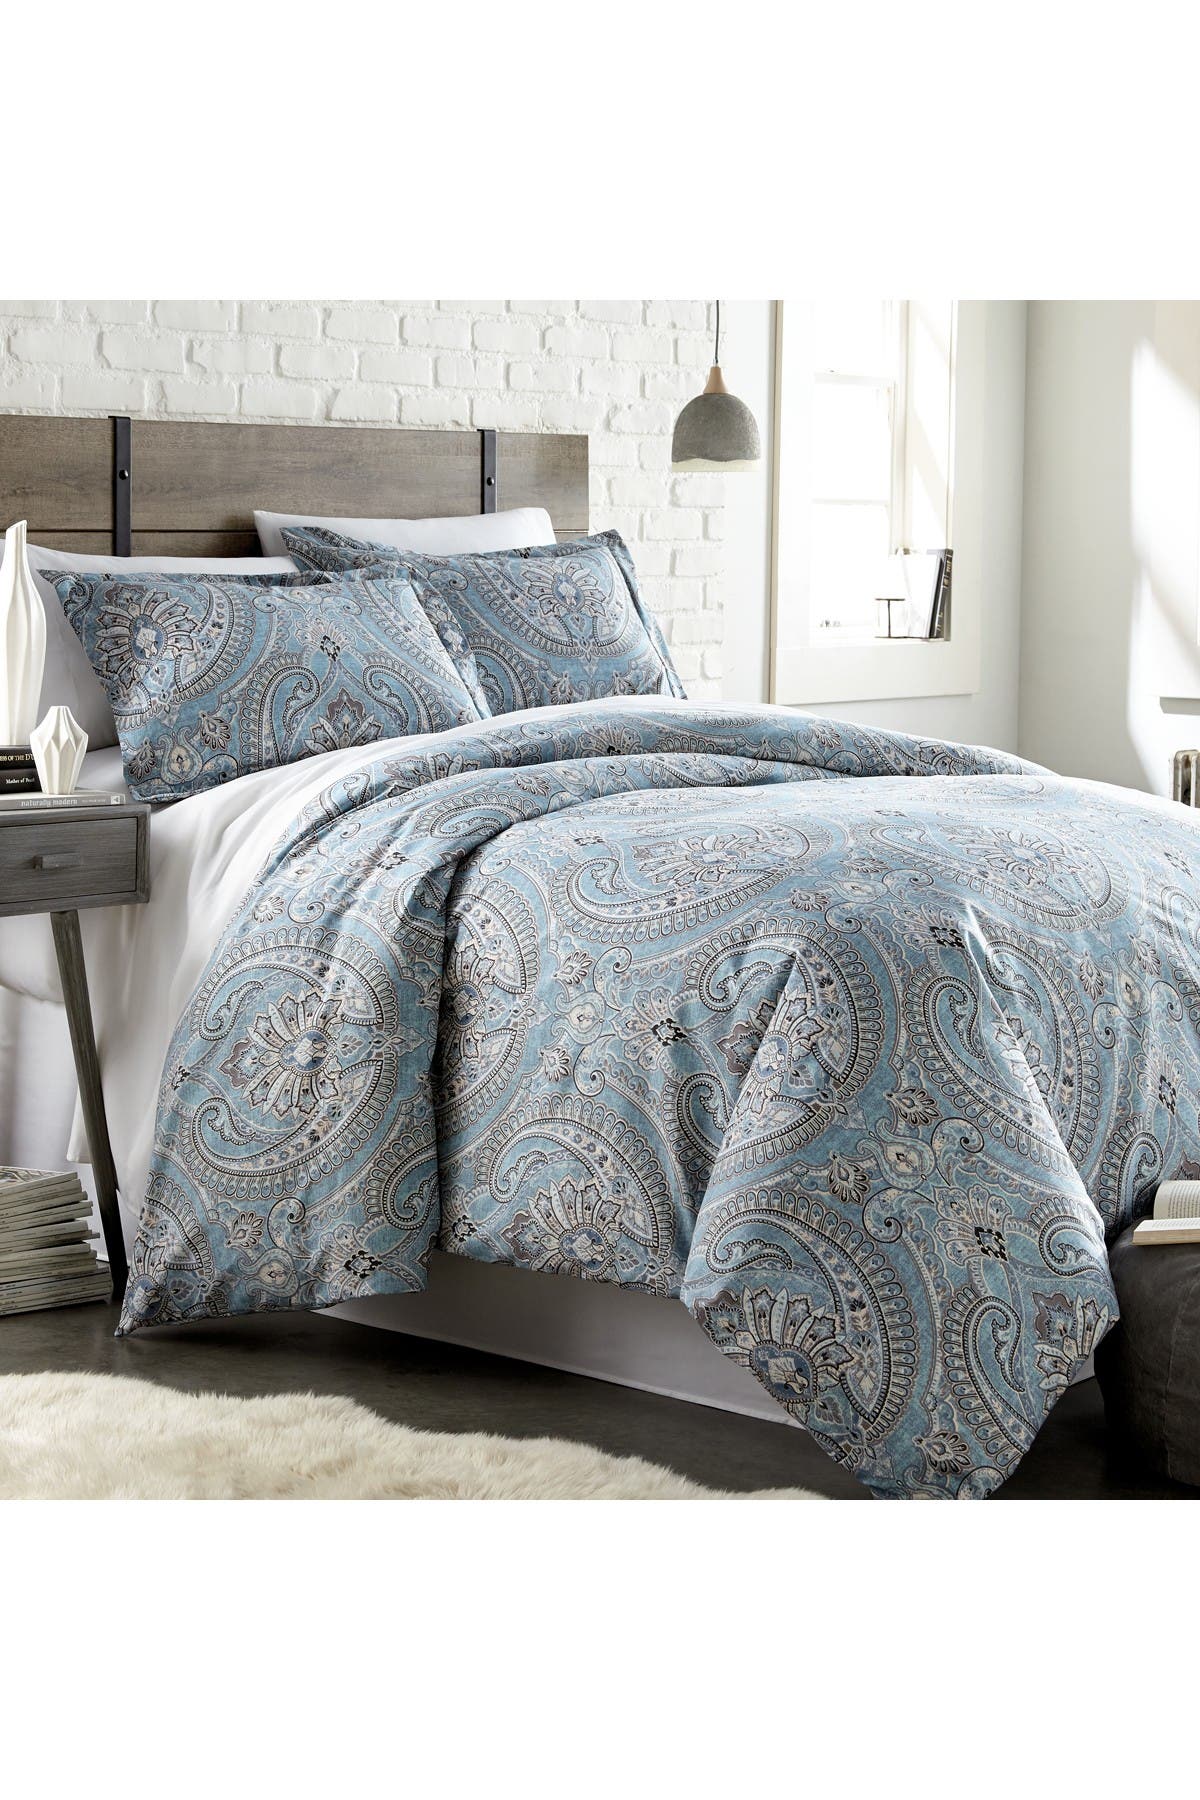 Southshore Fine Linens Full/queen  Pure Melody Printed Comforter Set In Turquoise/aqua